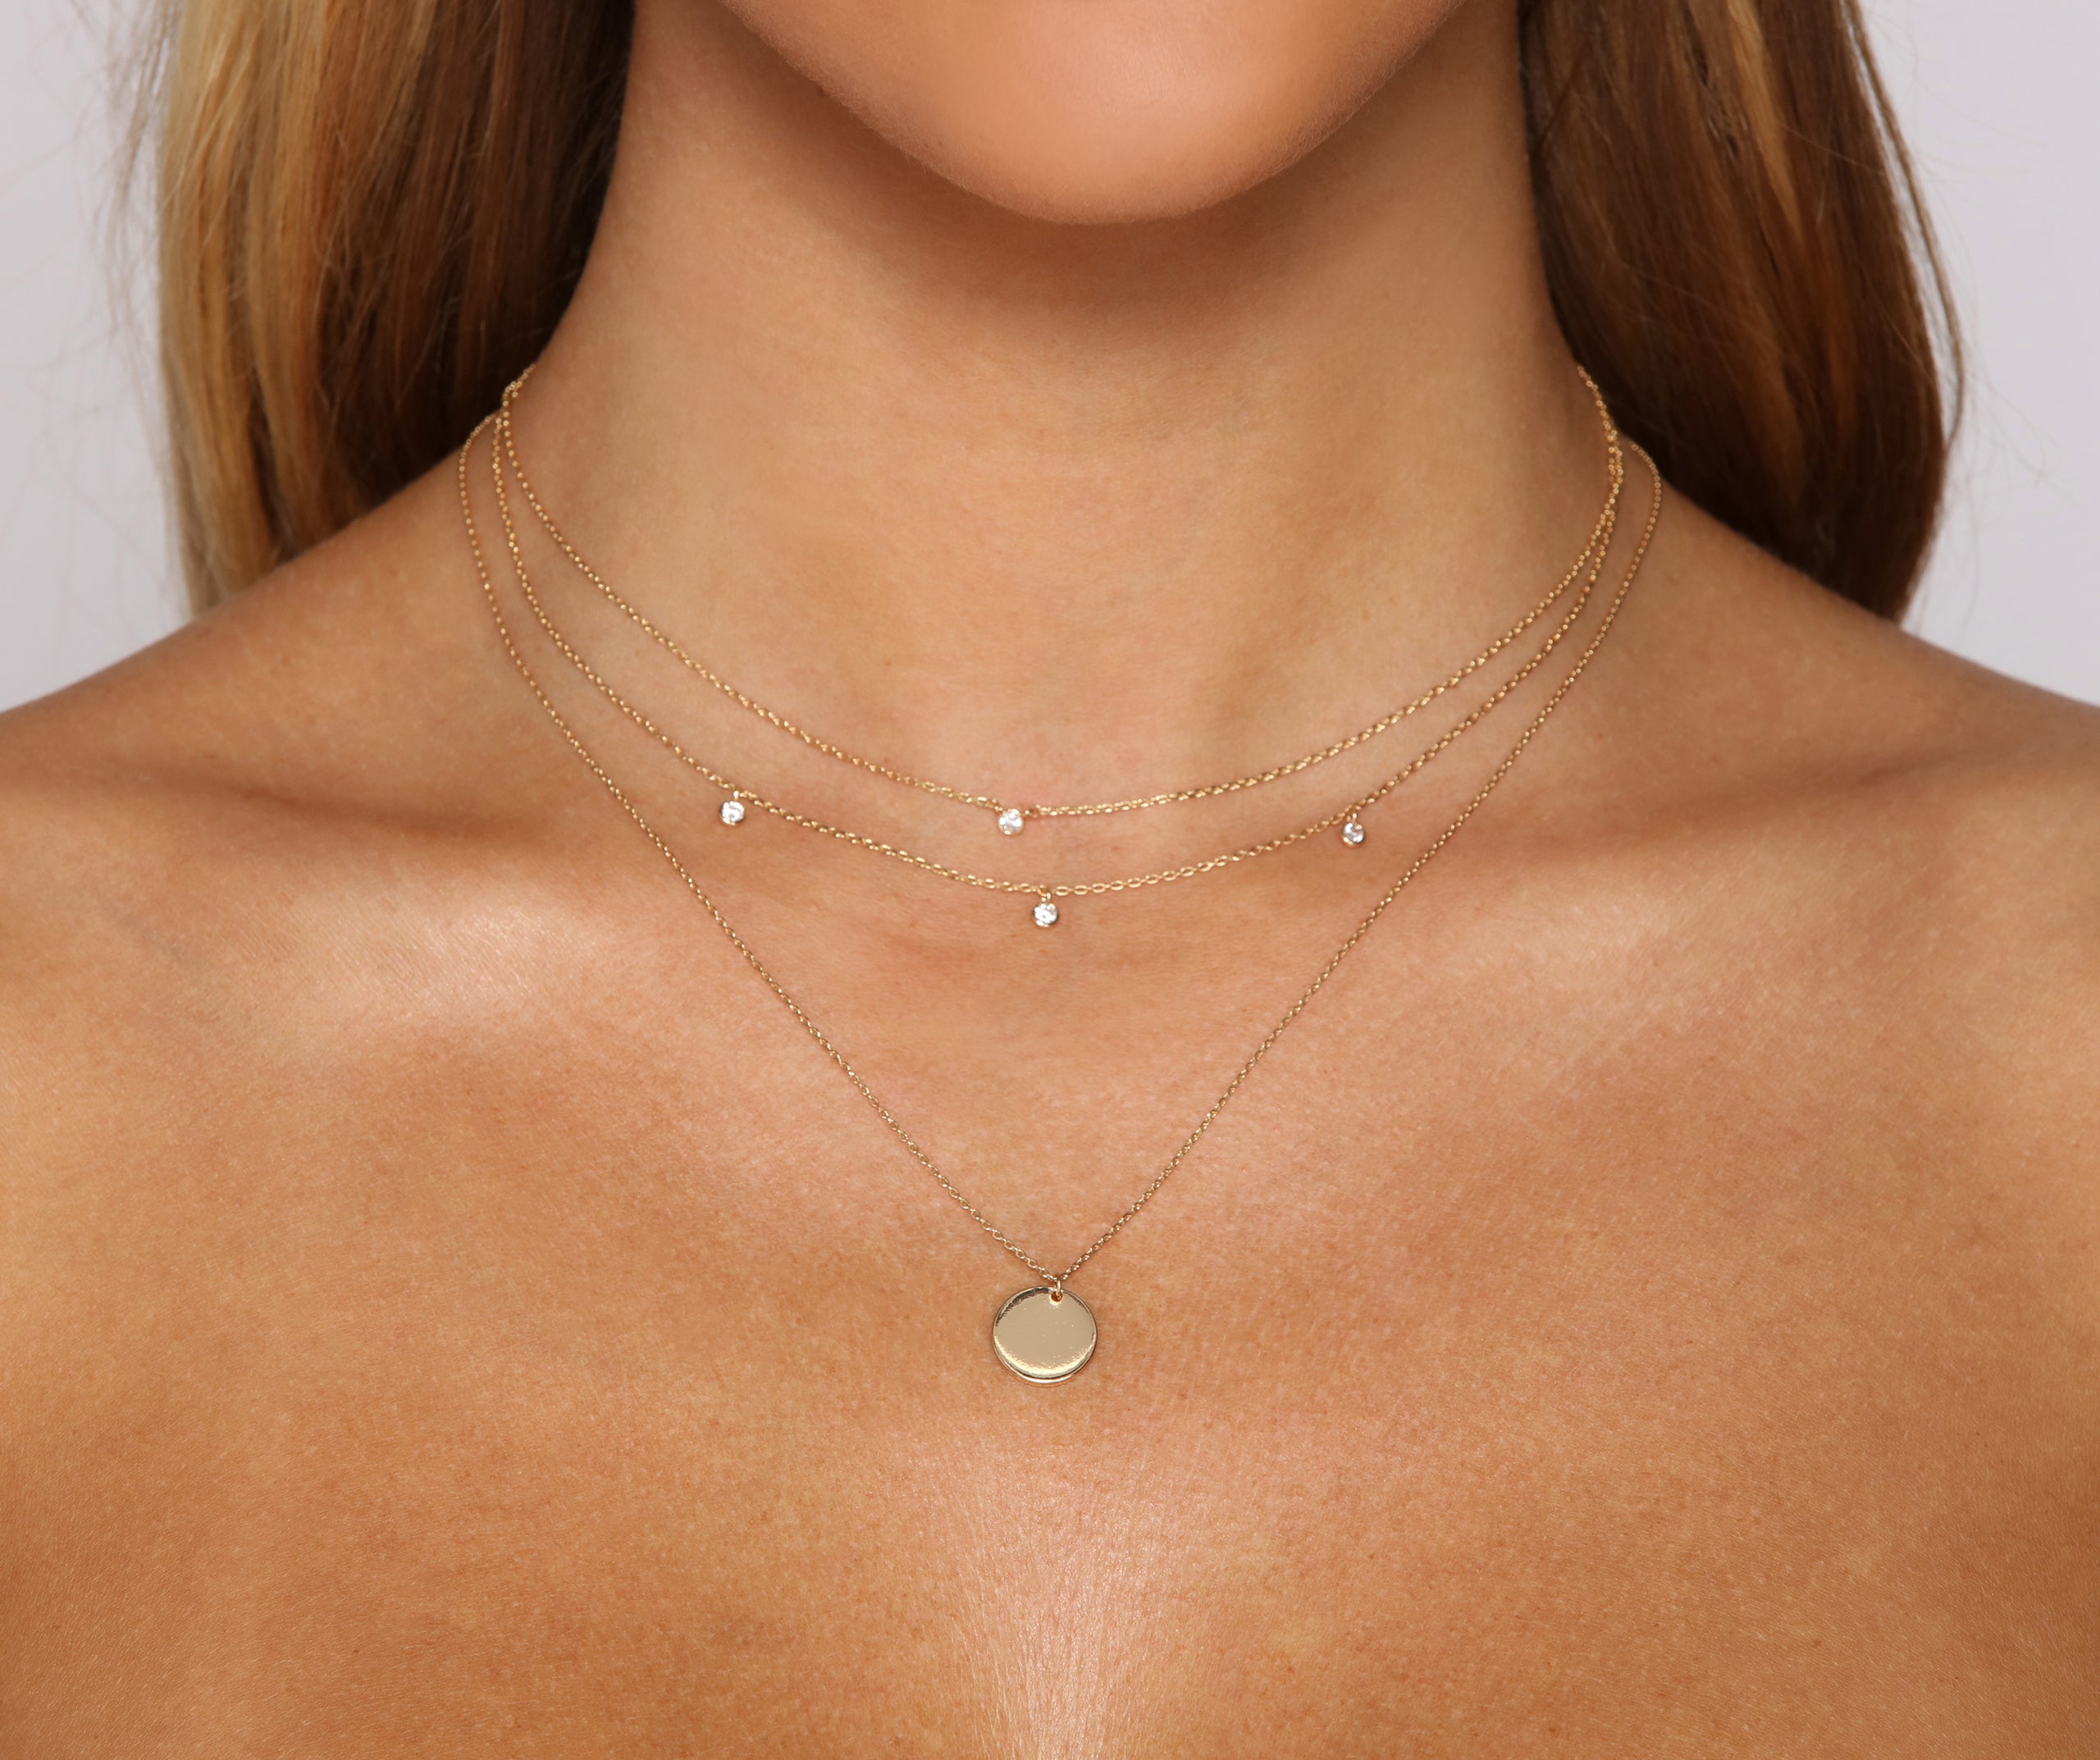 Dainty Details Layered Charm Necklaces